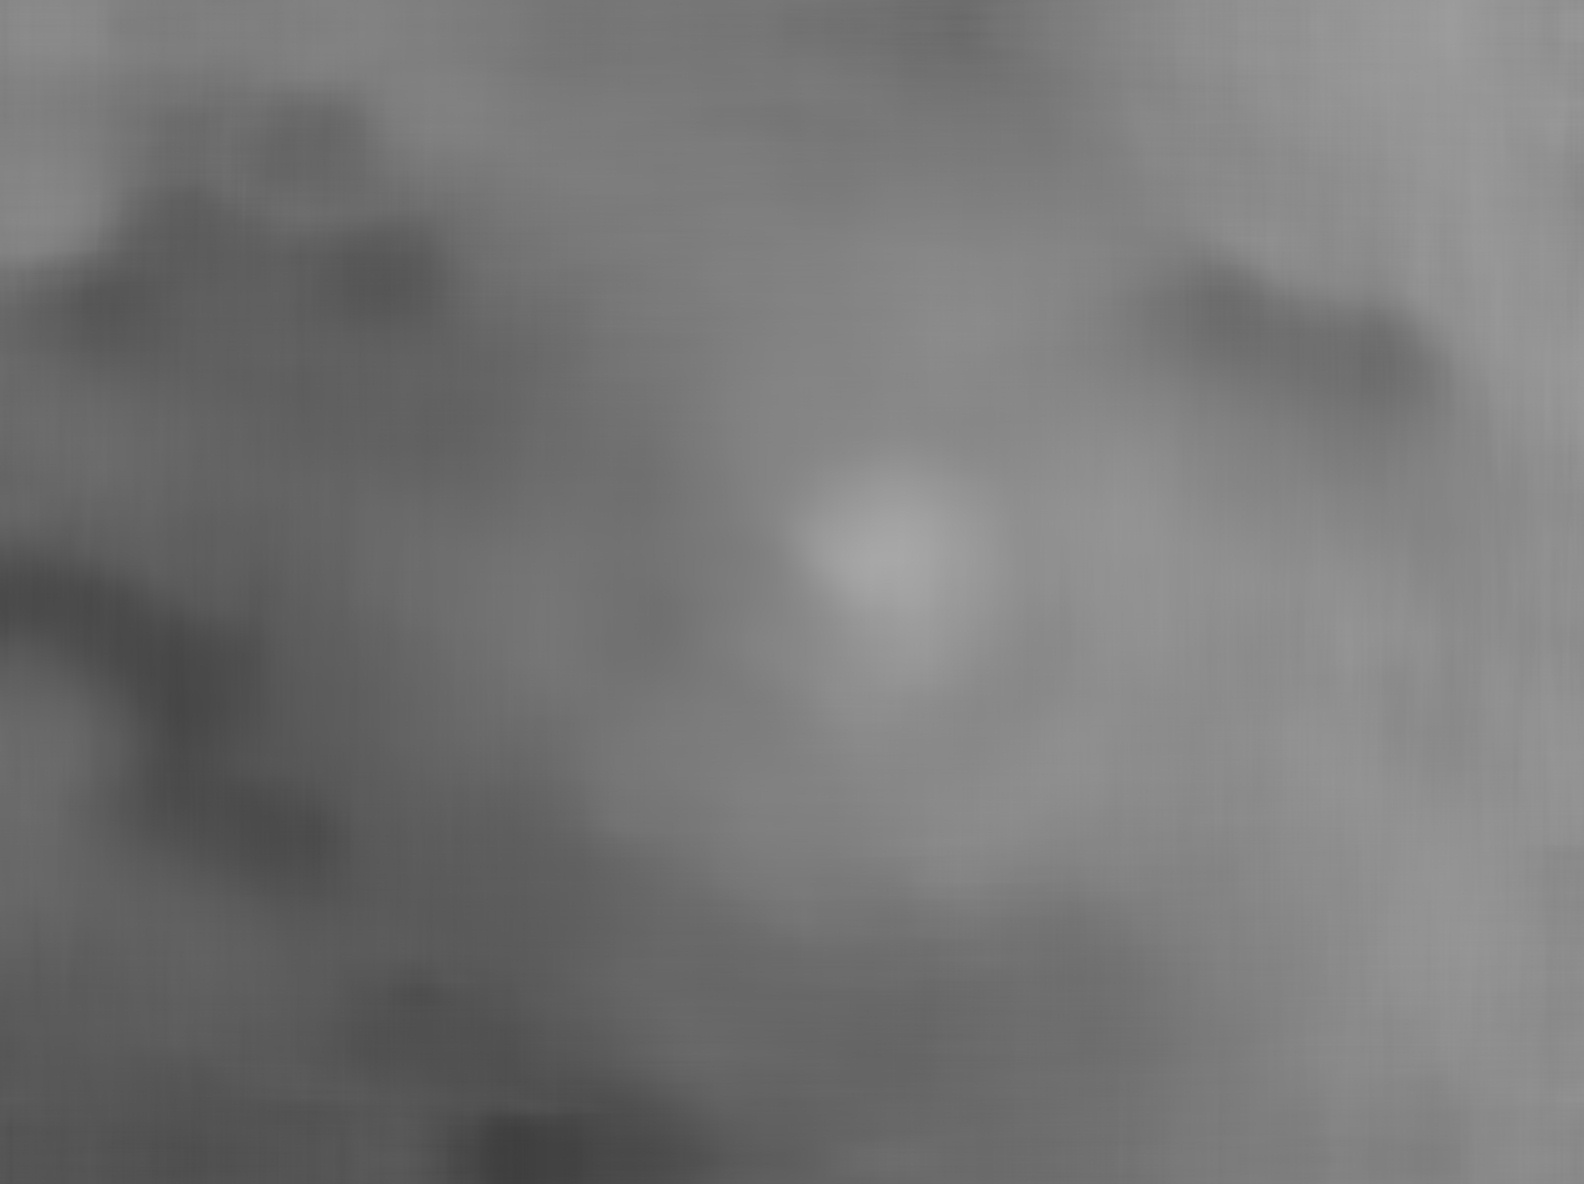 Nasa's Mars rover Curiosity acquired this image using its Mars Hand Lens Imager (MAHLI) on Sol 3481